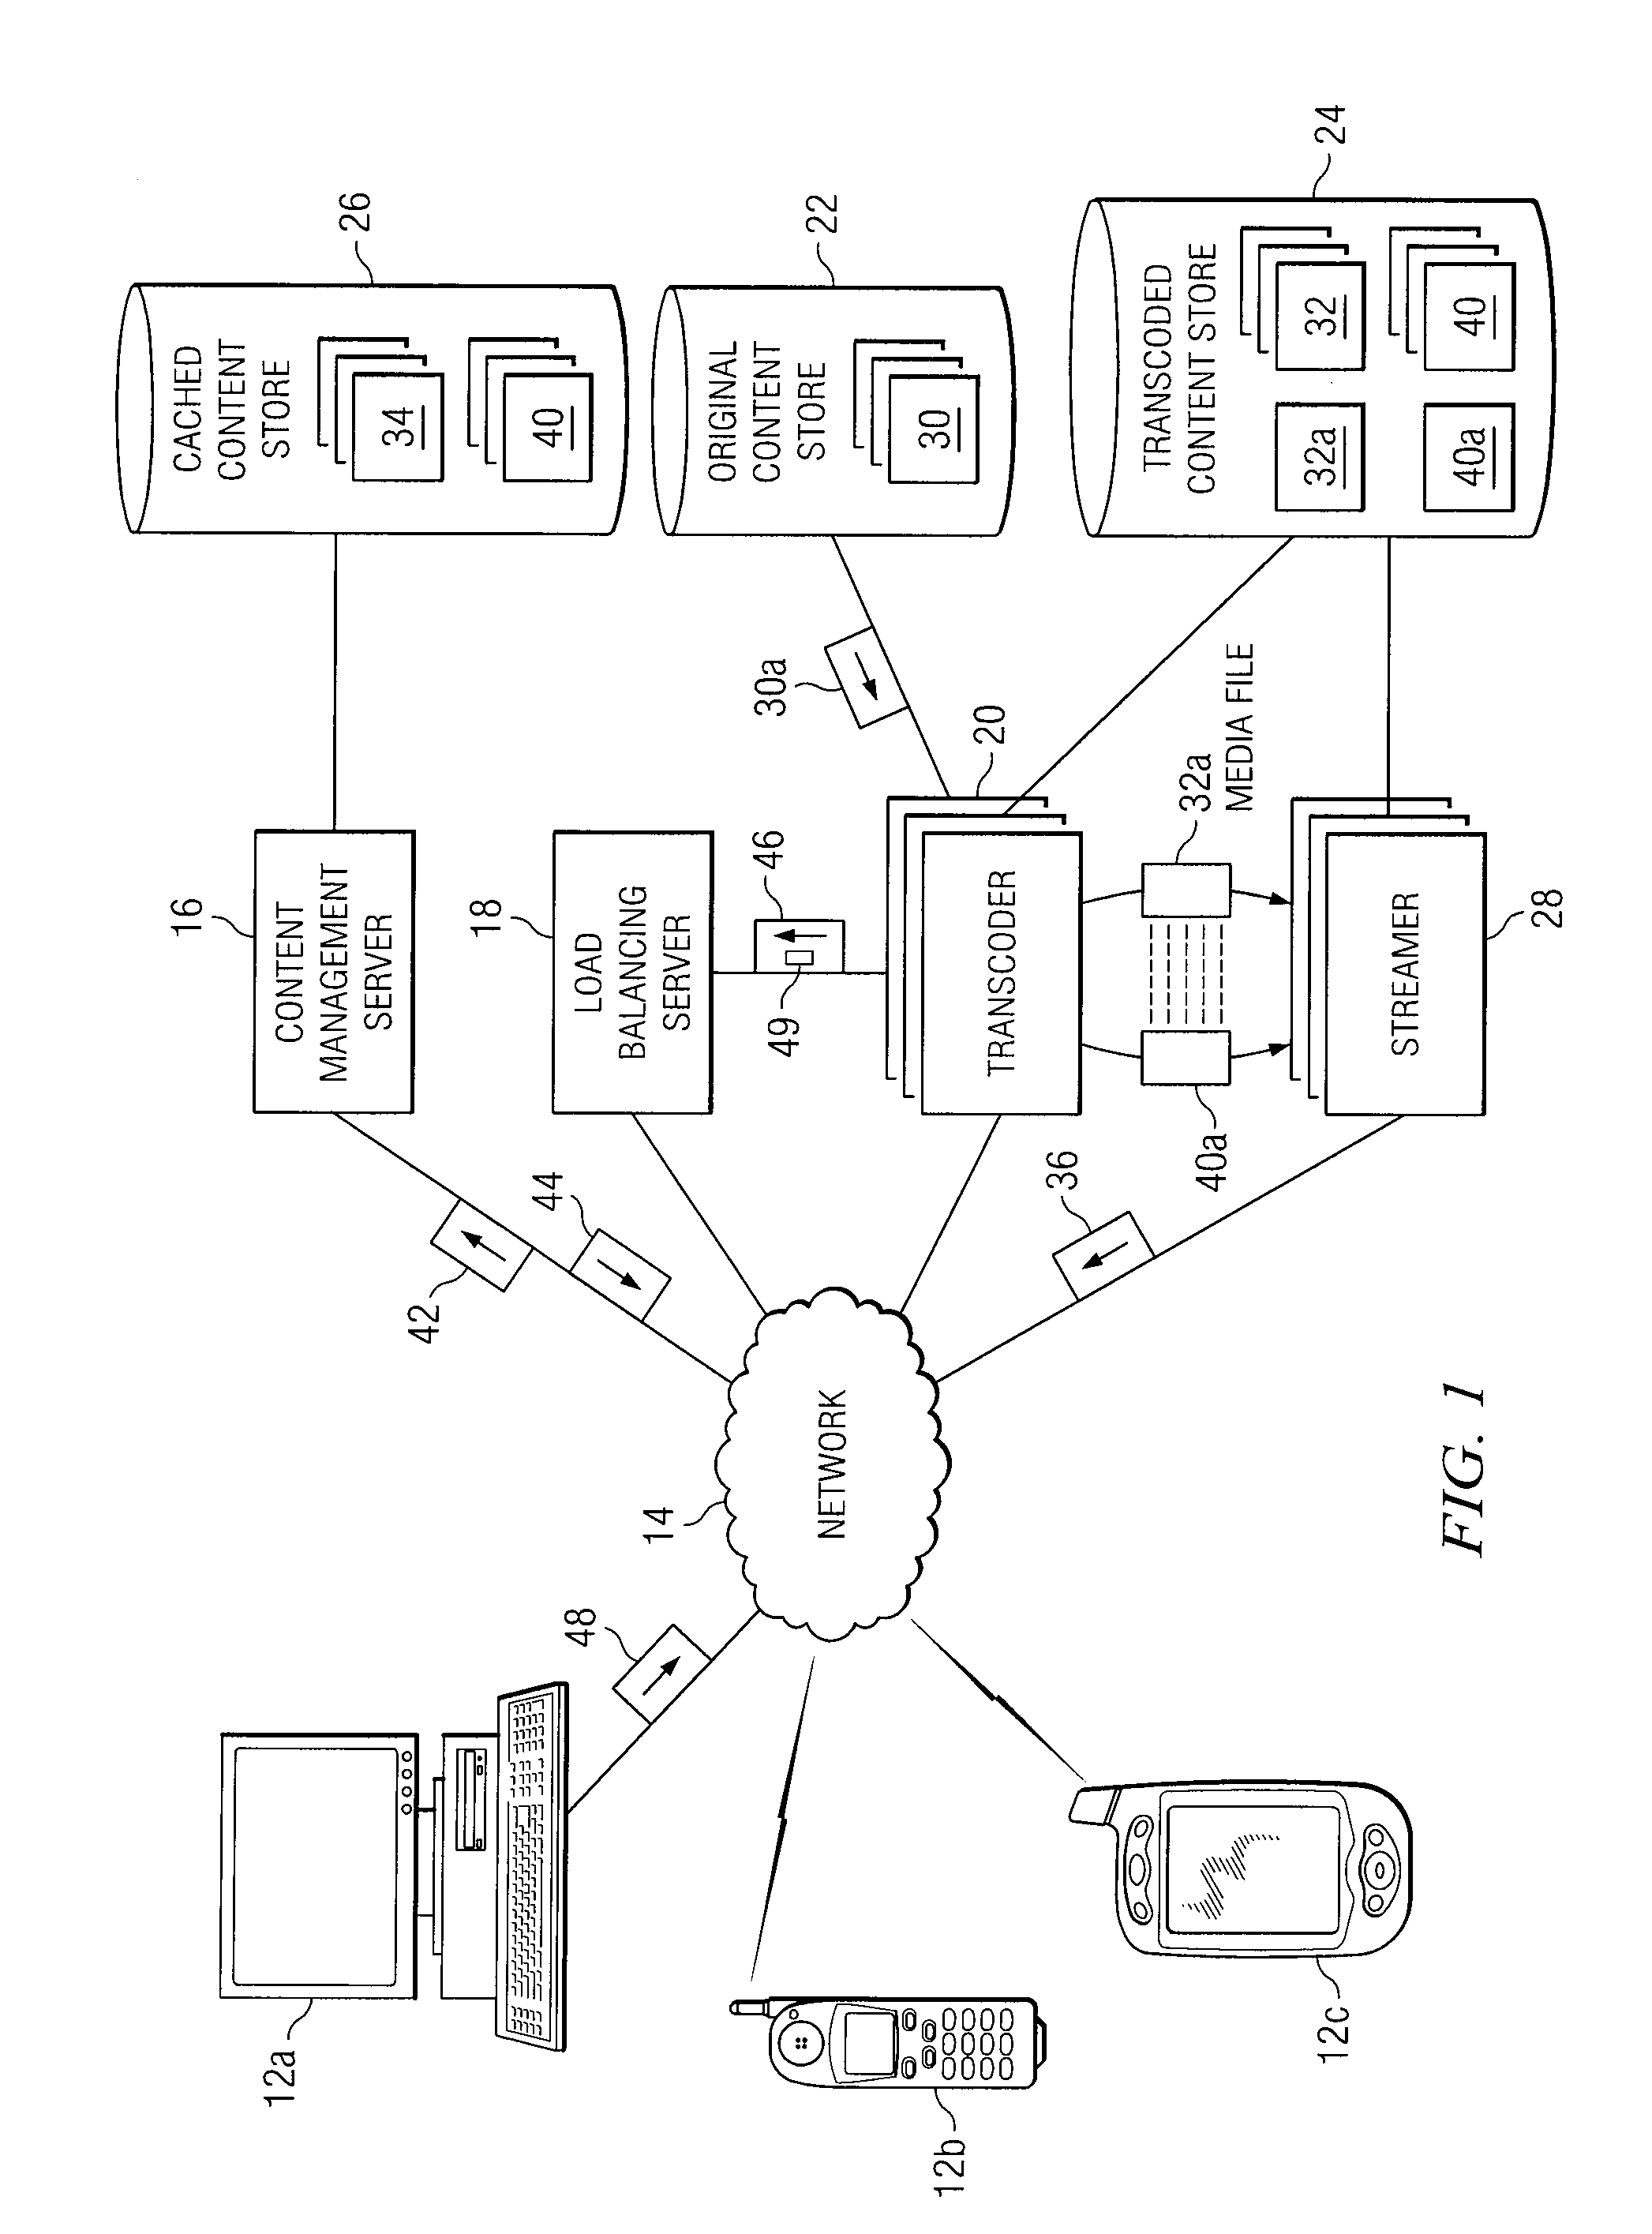 System and method for delivering content